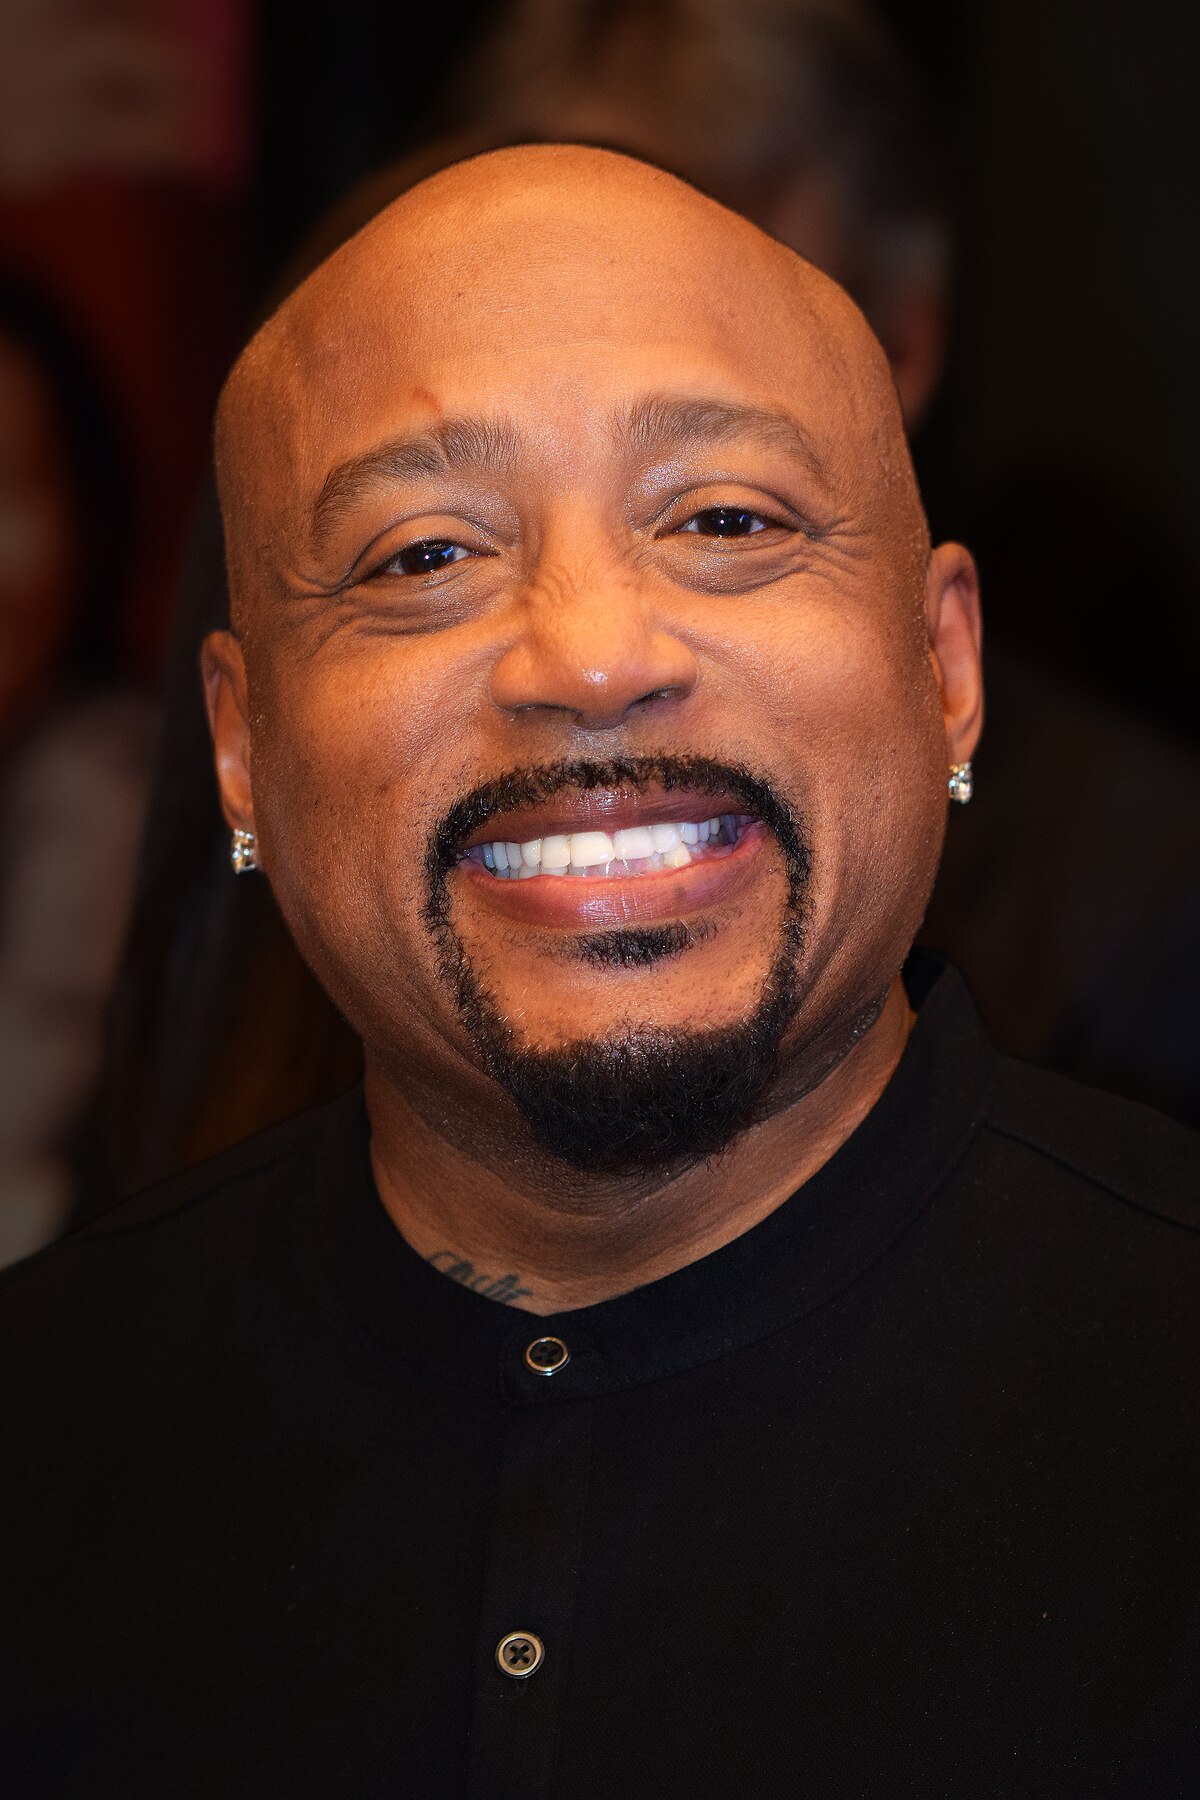 Who Is Daymond John's Wife? All About Heather Taras